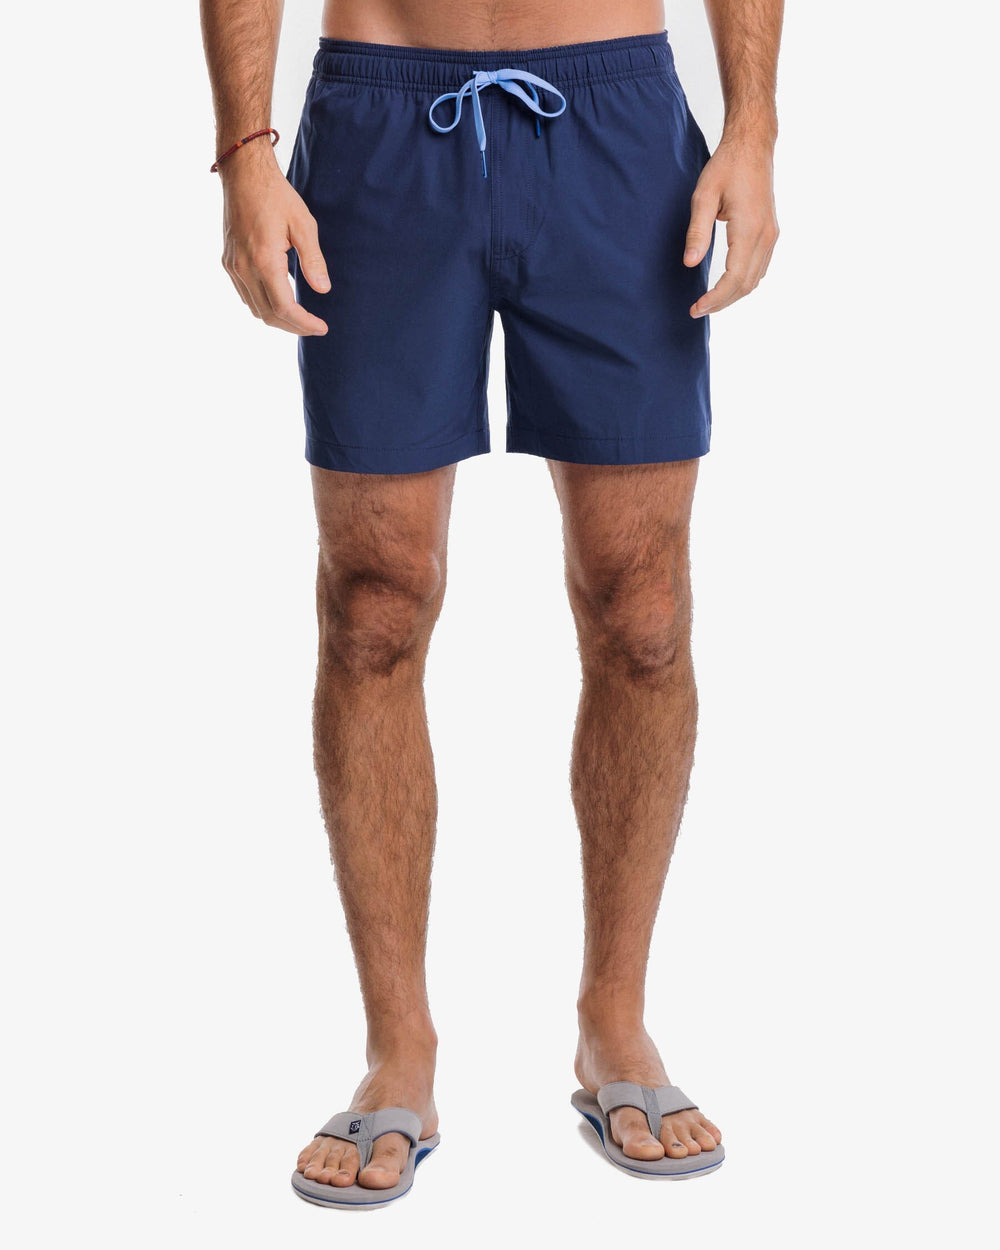 The front view of the Southern Tide Solid Swim Trunk 3 by Southern Tide - True Navy